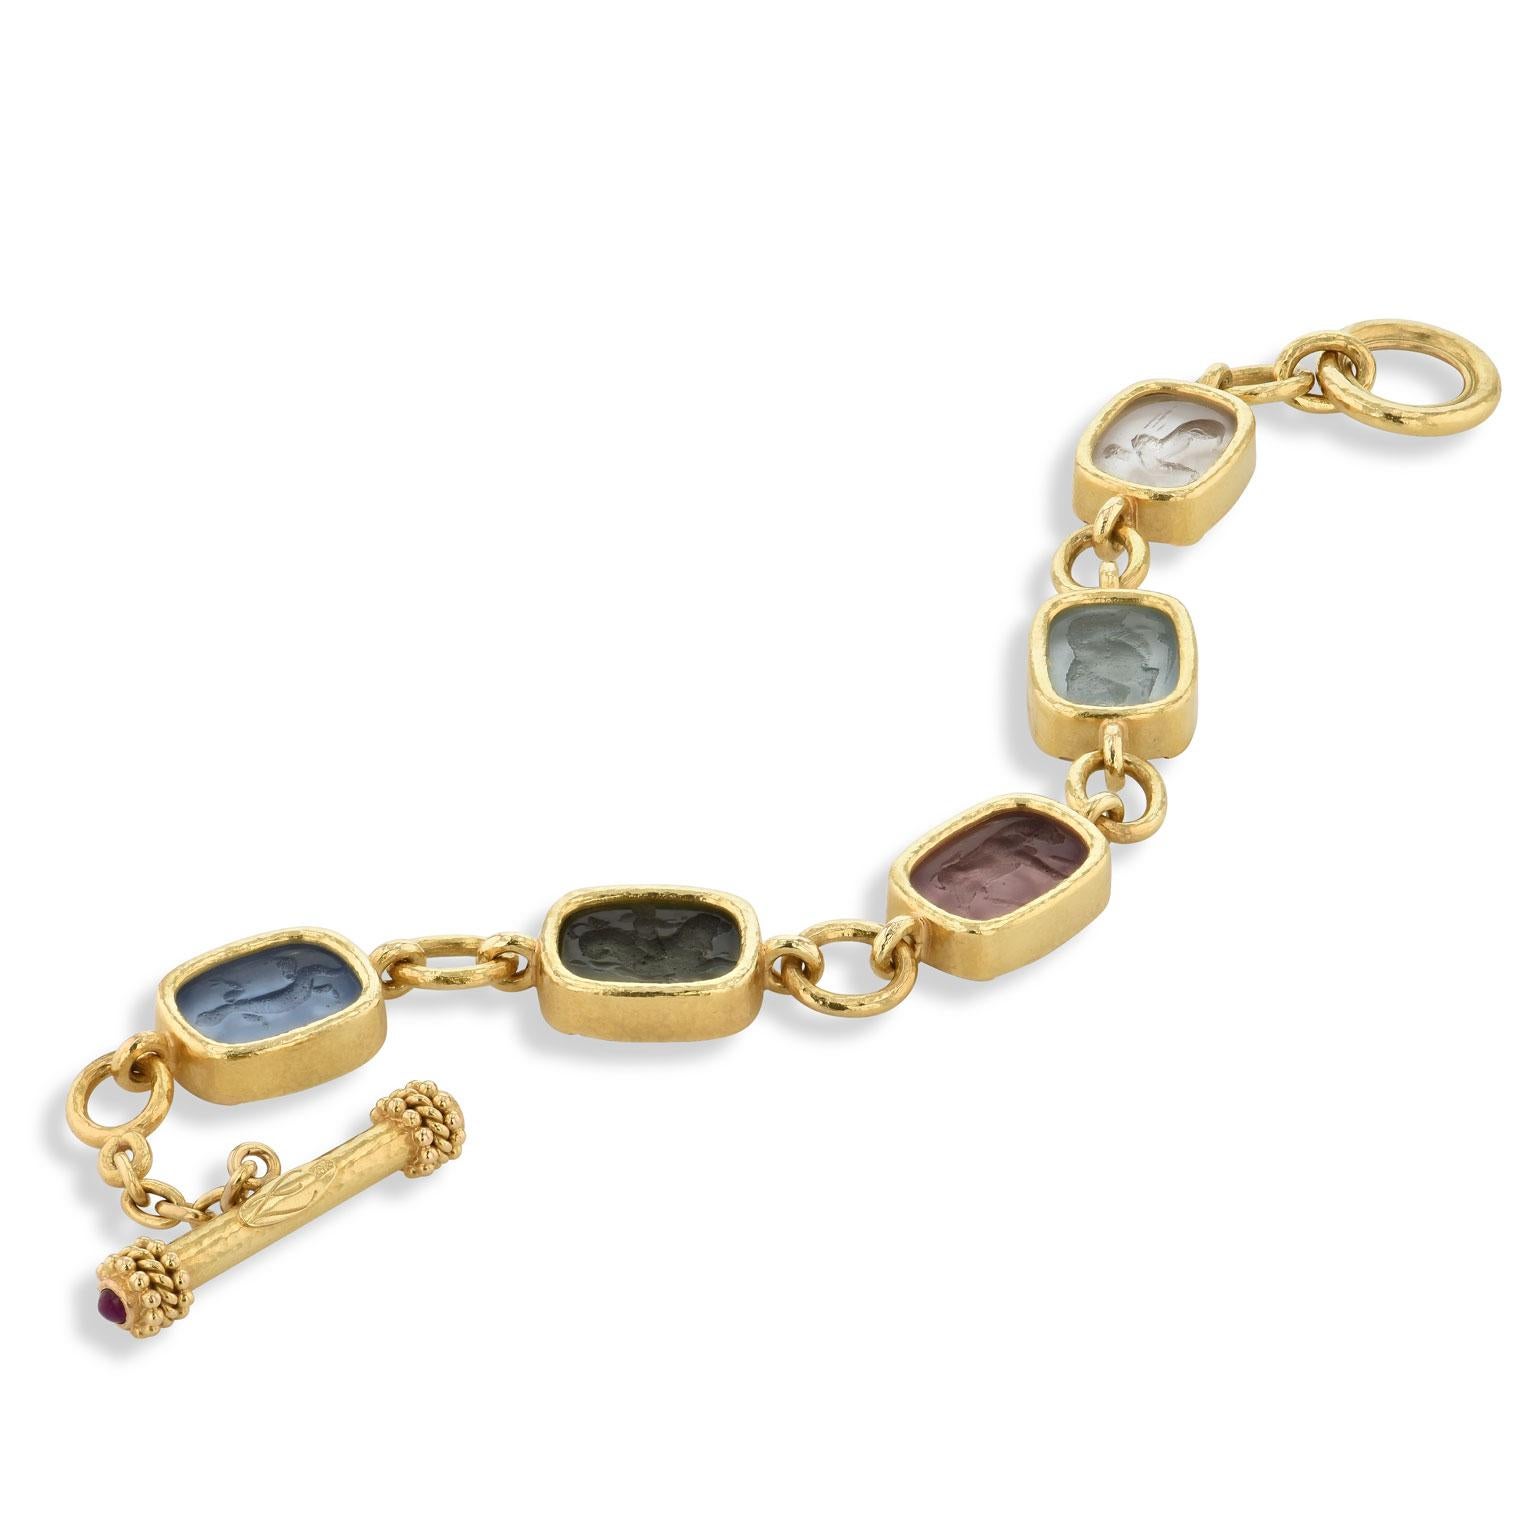 This previously loved Elizabeth Locke 18 karat yellow gold toggle bracelet features five multi-color intaglio incised antique animals. Make a bold statement with this spirited piece (Estimated Retail $8,050).